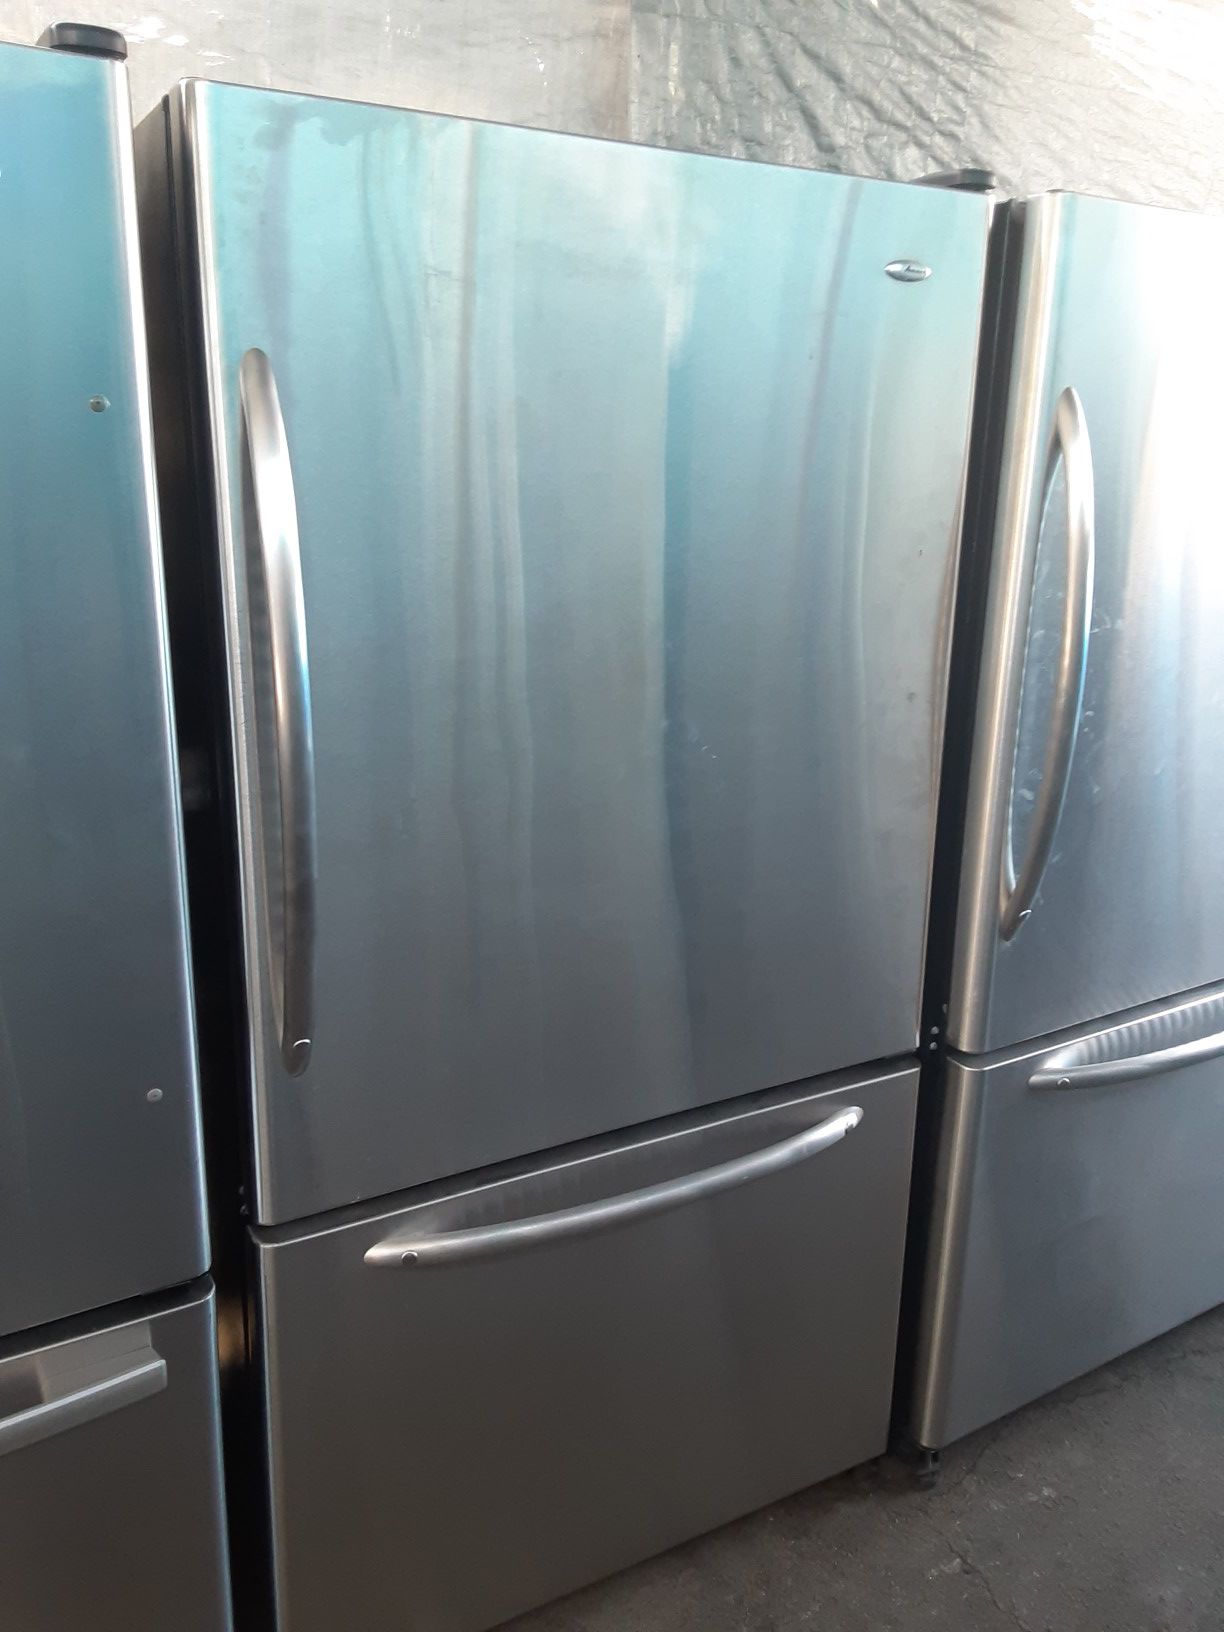 $399 Whirlpool stainless steel bottom freezer fridge includes delivering the San Fernando Valley warranty and installation